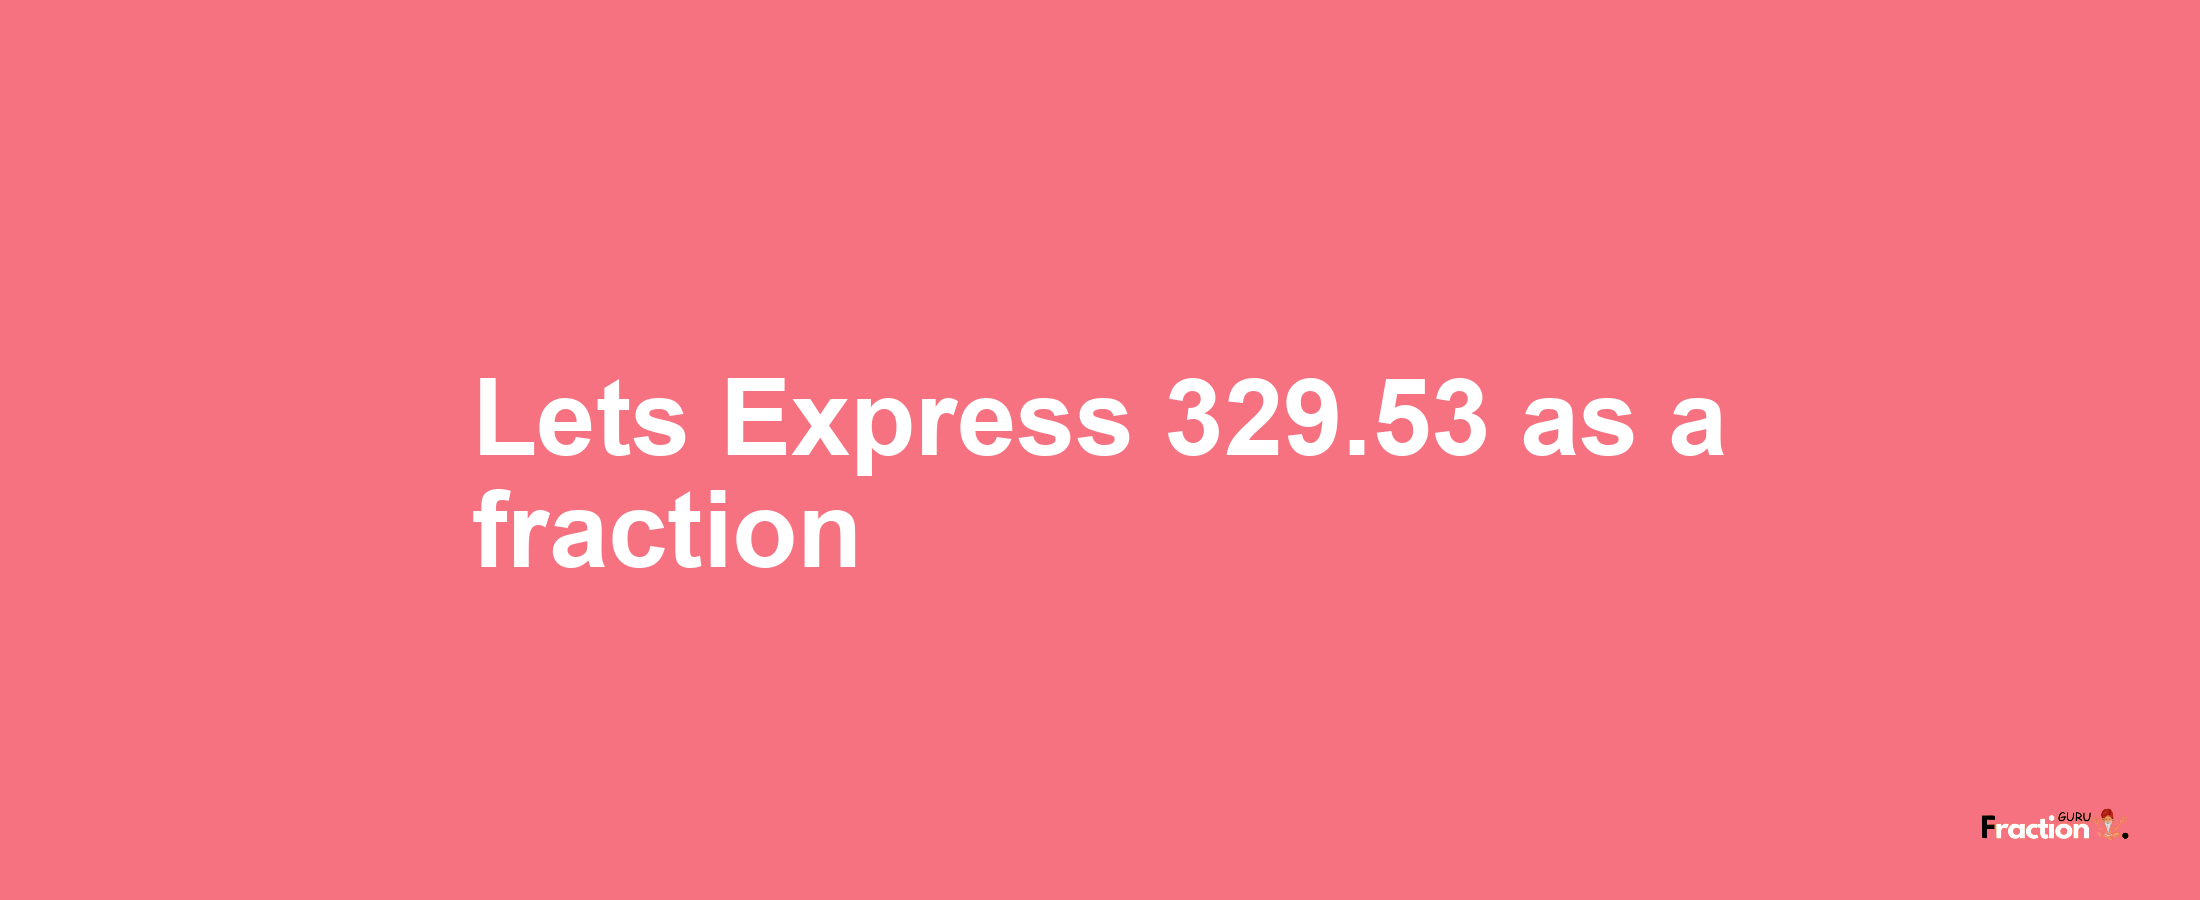 Lets Express 329.53 as afraction